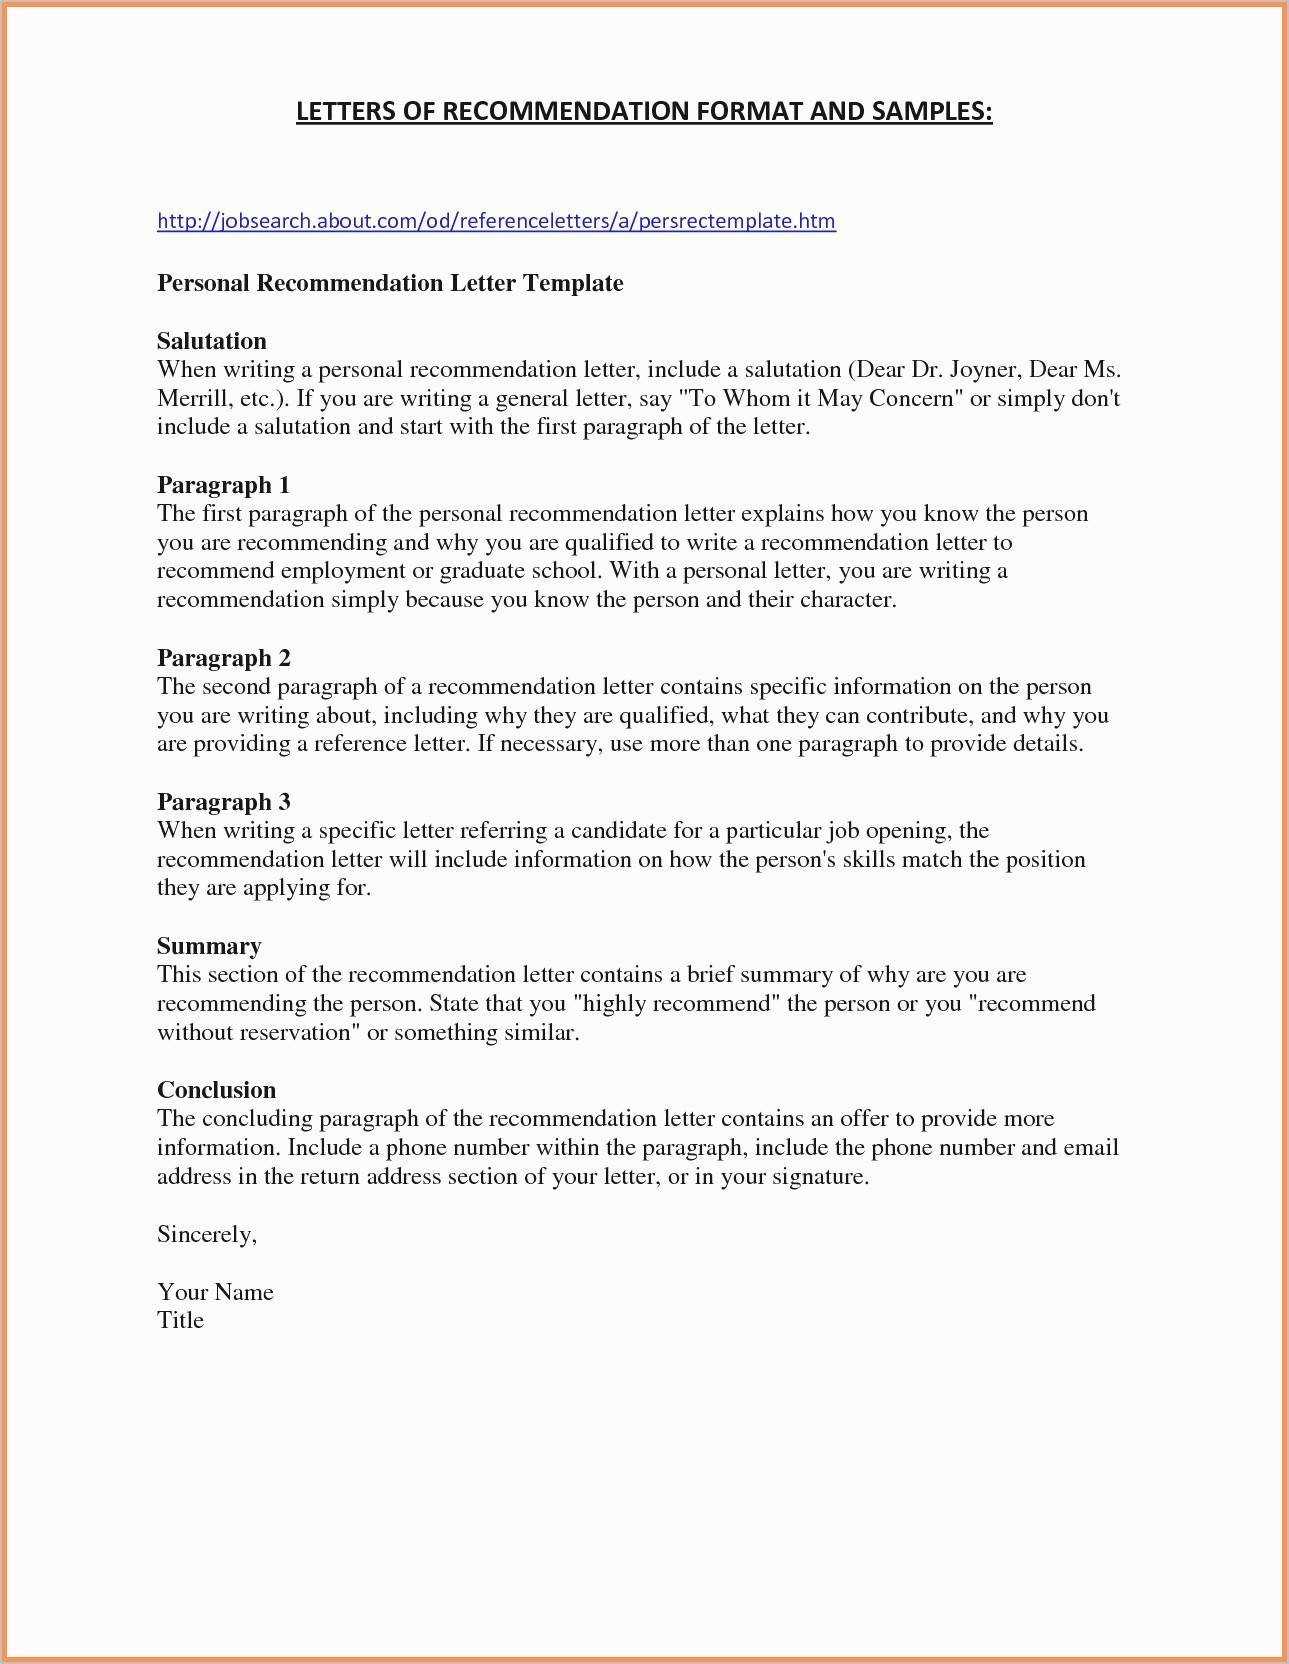 Sample 401K Summary Annual Report Cover Letter | Manswikstrom.se Pertaining To Summary Annual Report Template